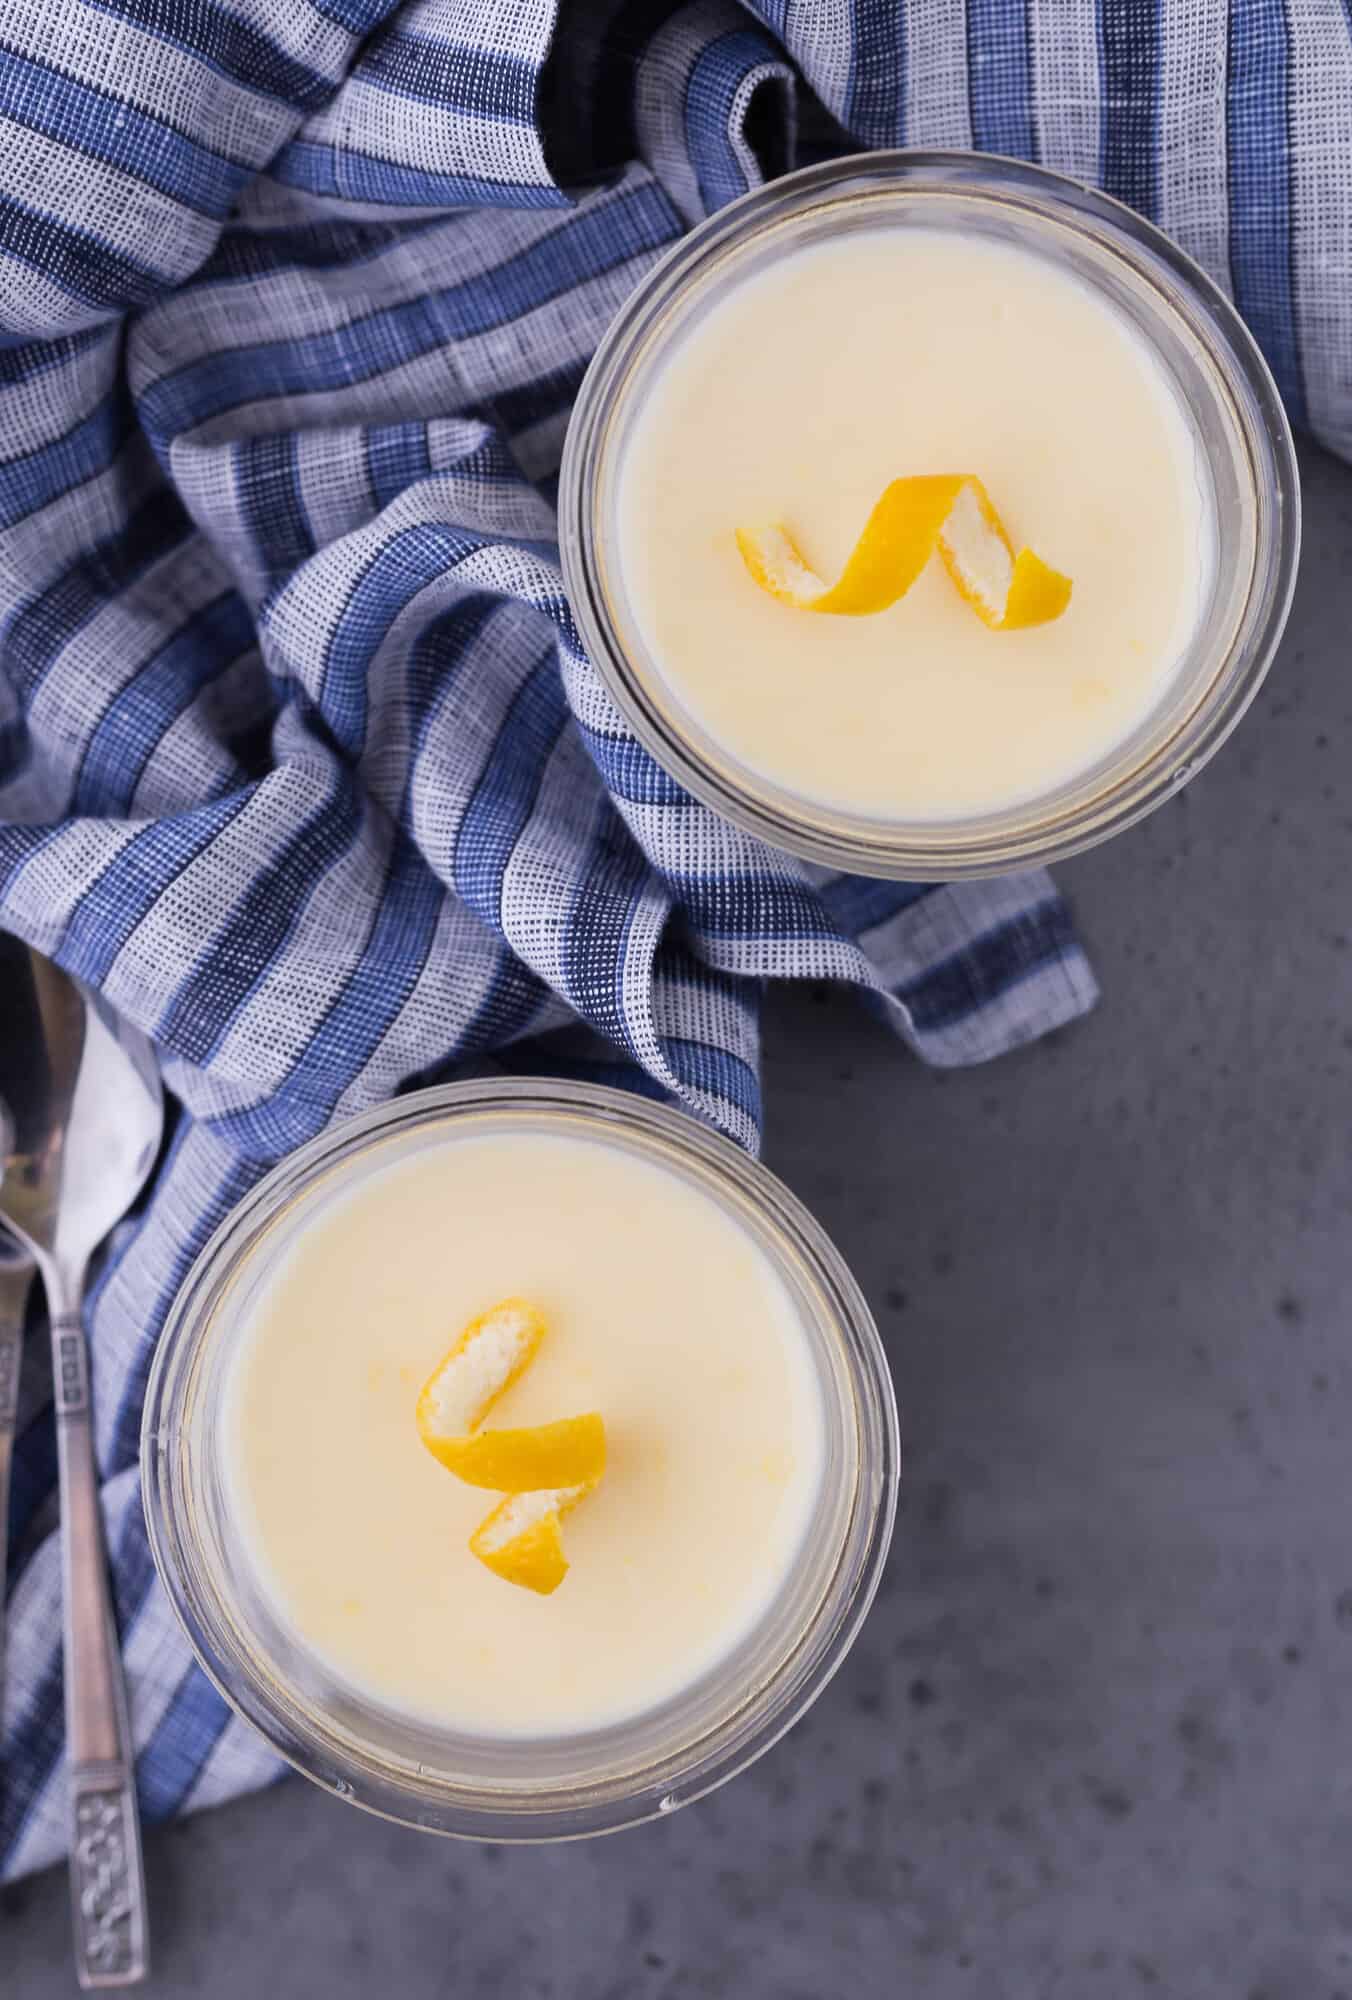 Overhead view of two servings of lemon pudding.